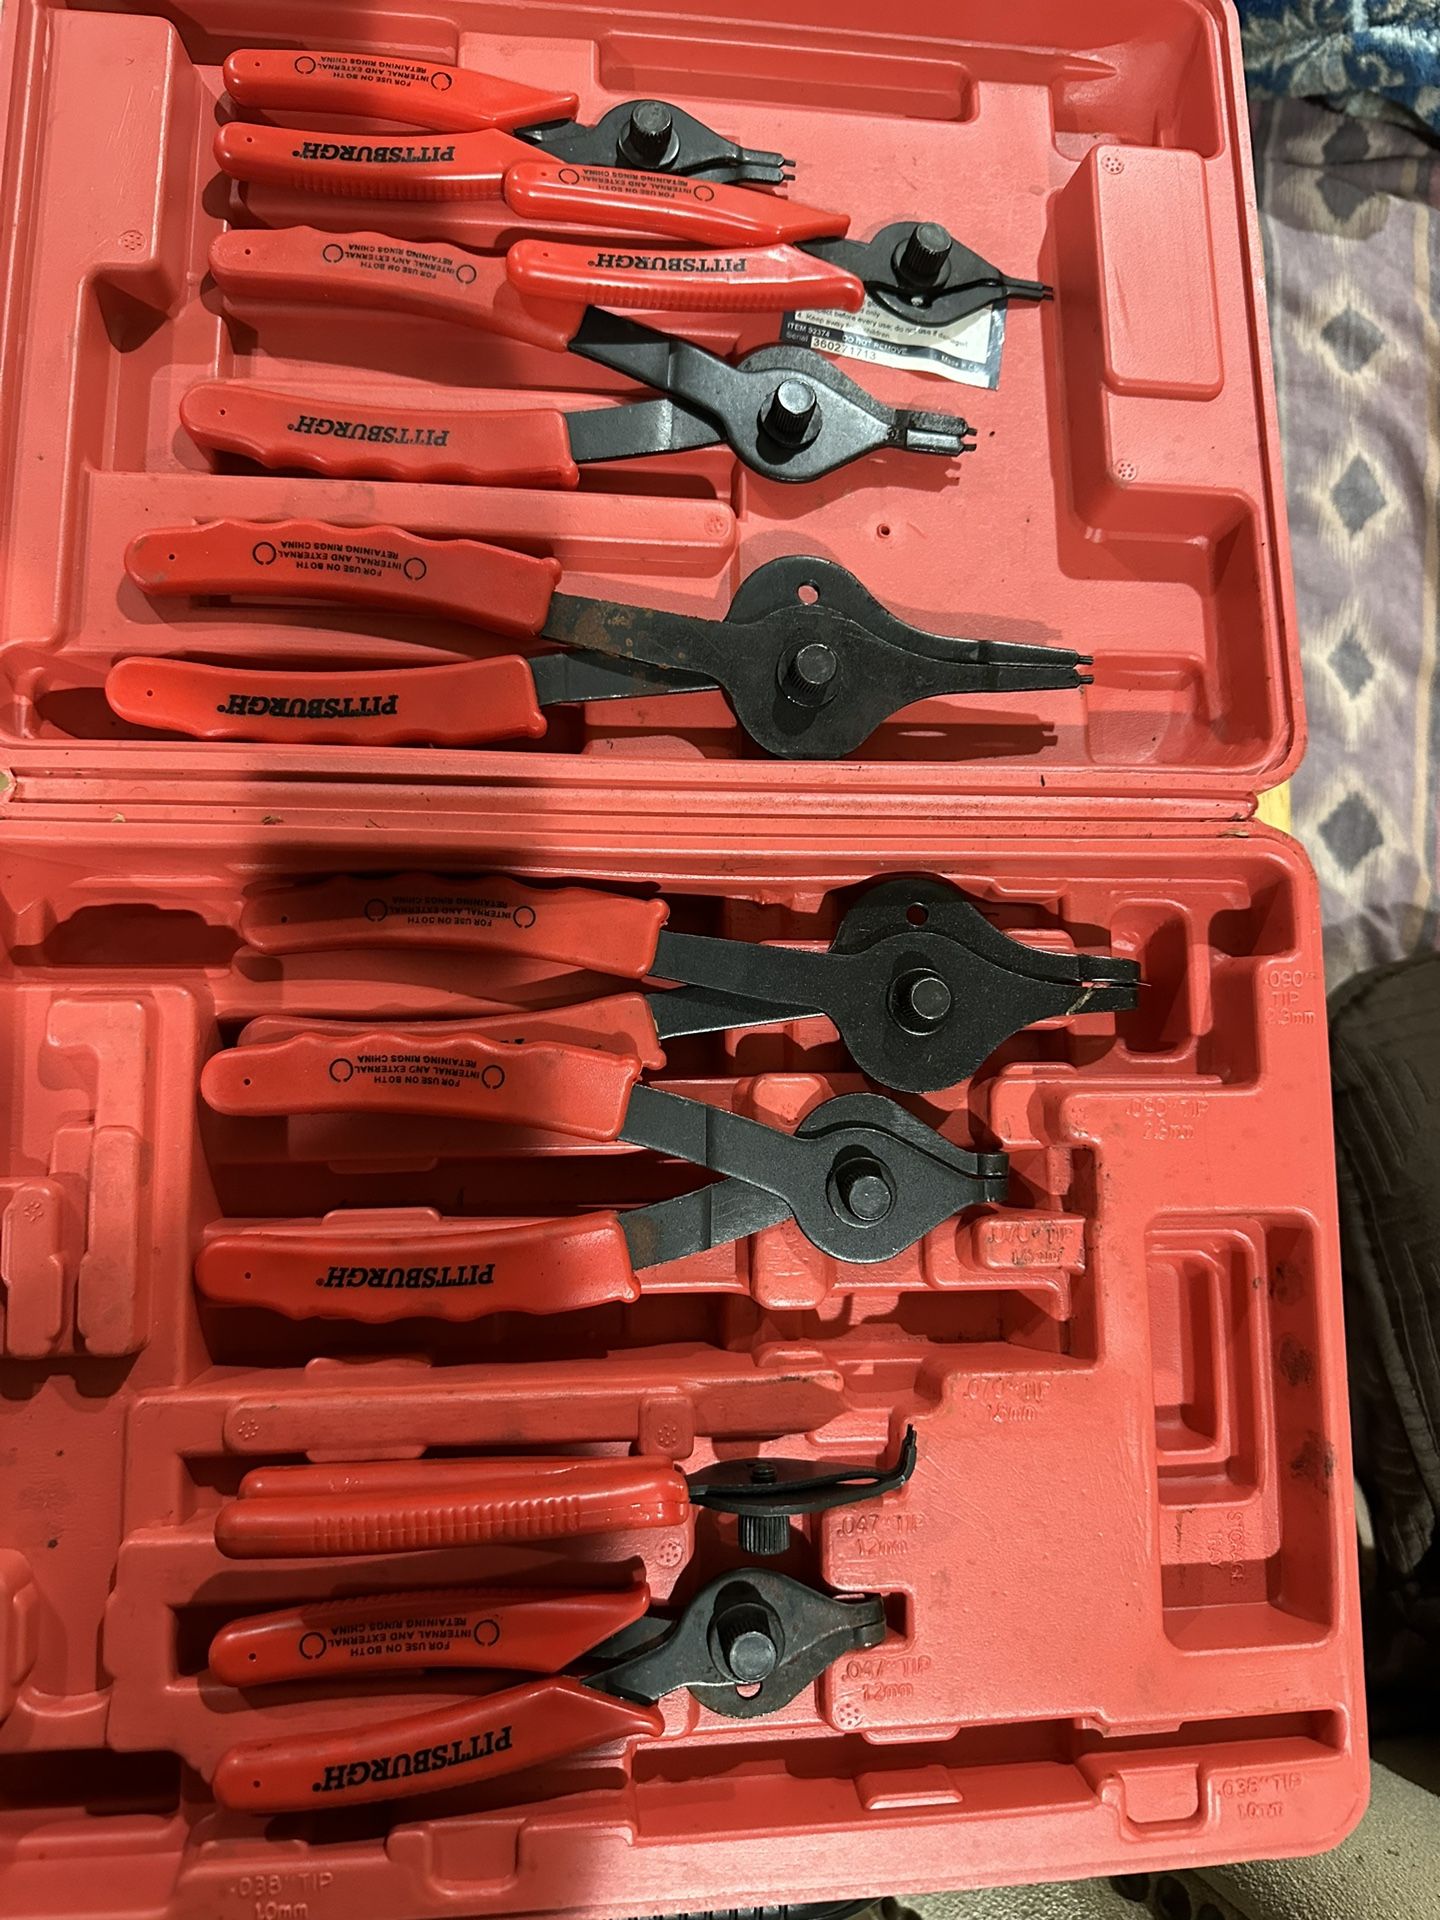 Pittsburgh 8 Pc Snap Ring Plier Set #92374 Red Hard Case Tools